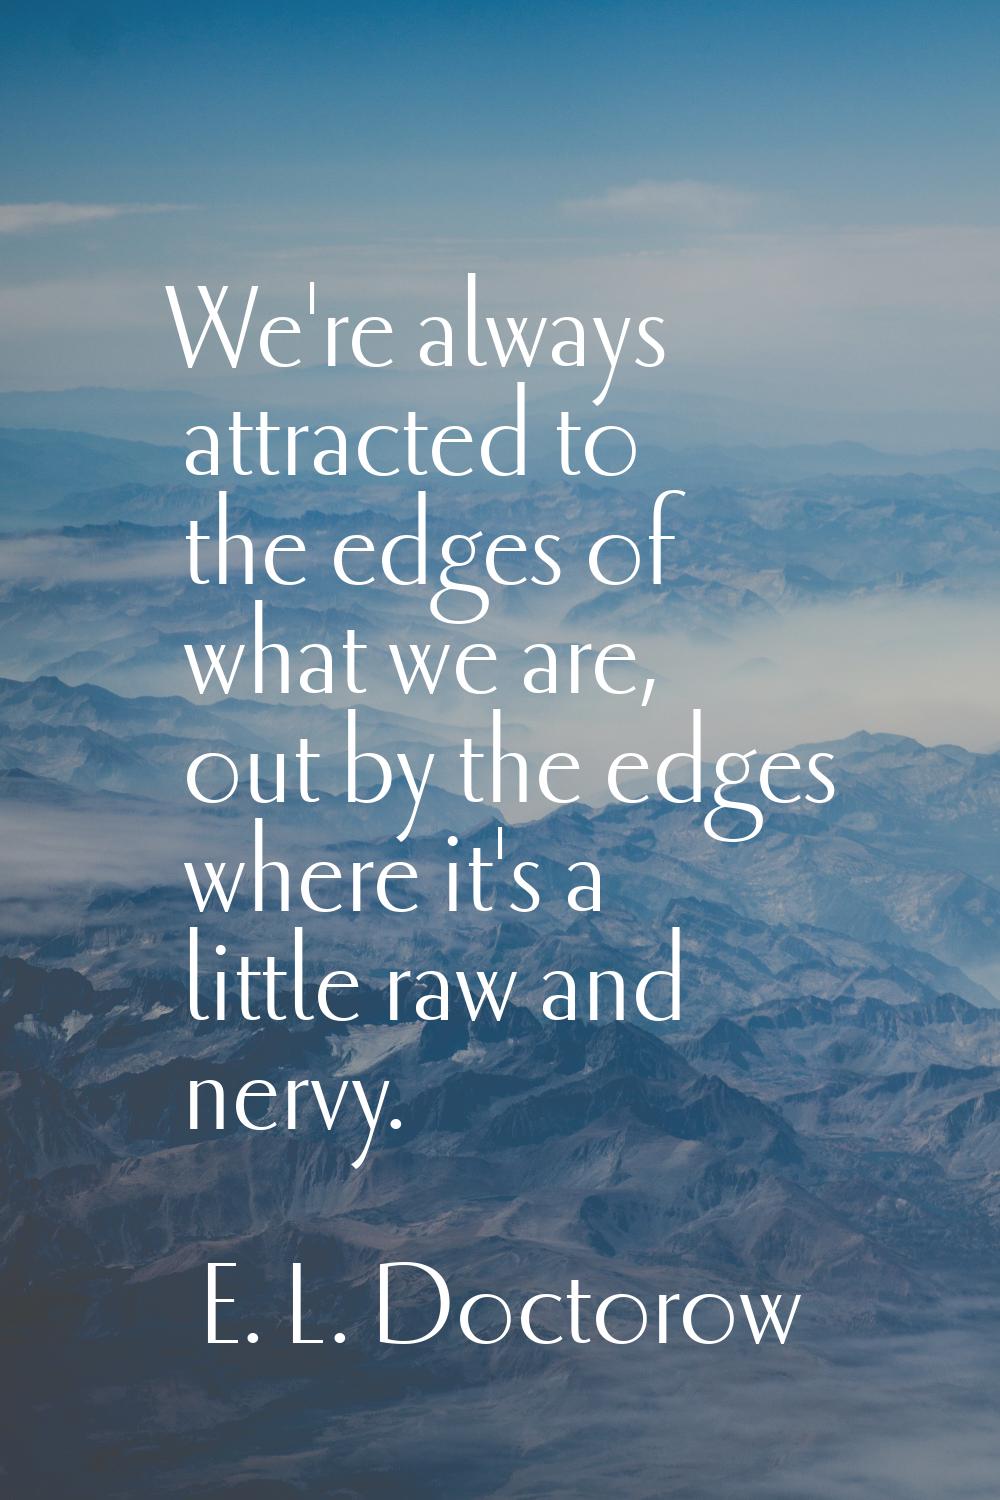 We're always attracted to the edges of what we are, out by the edges where it's a little raw and ne